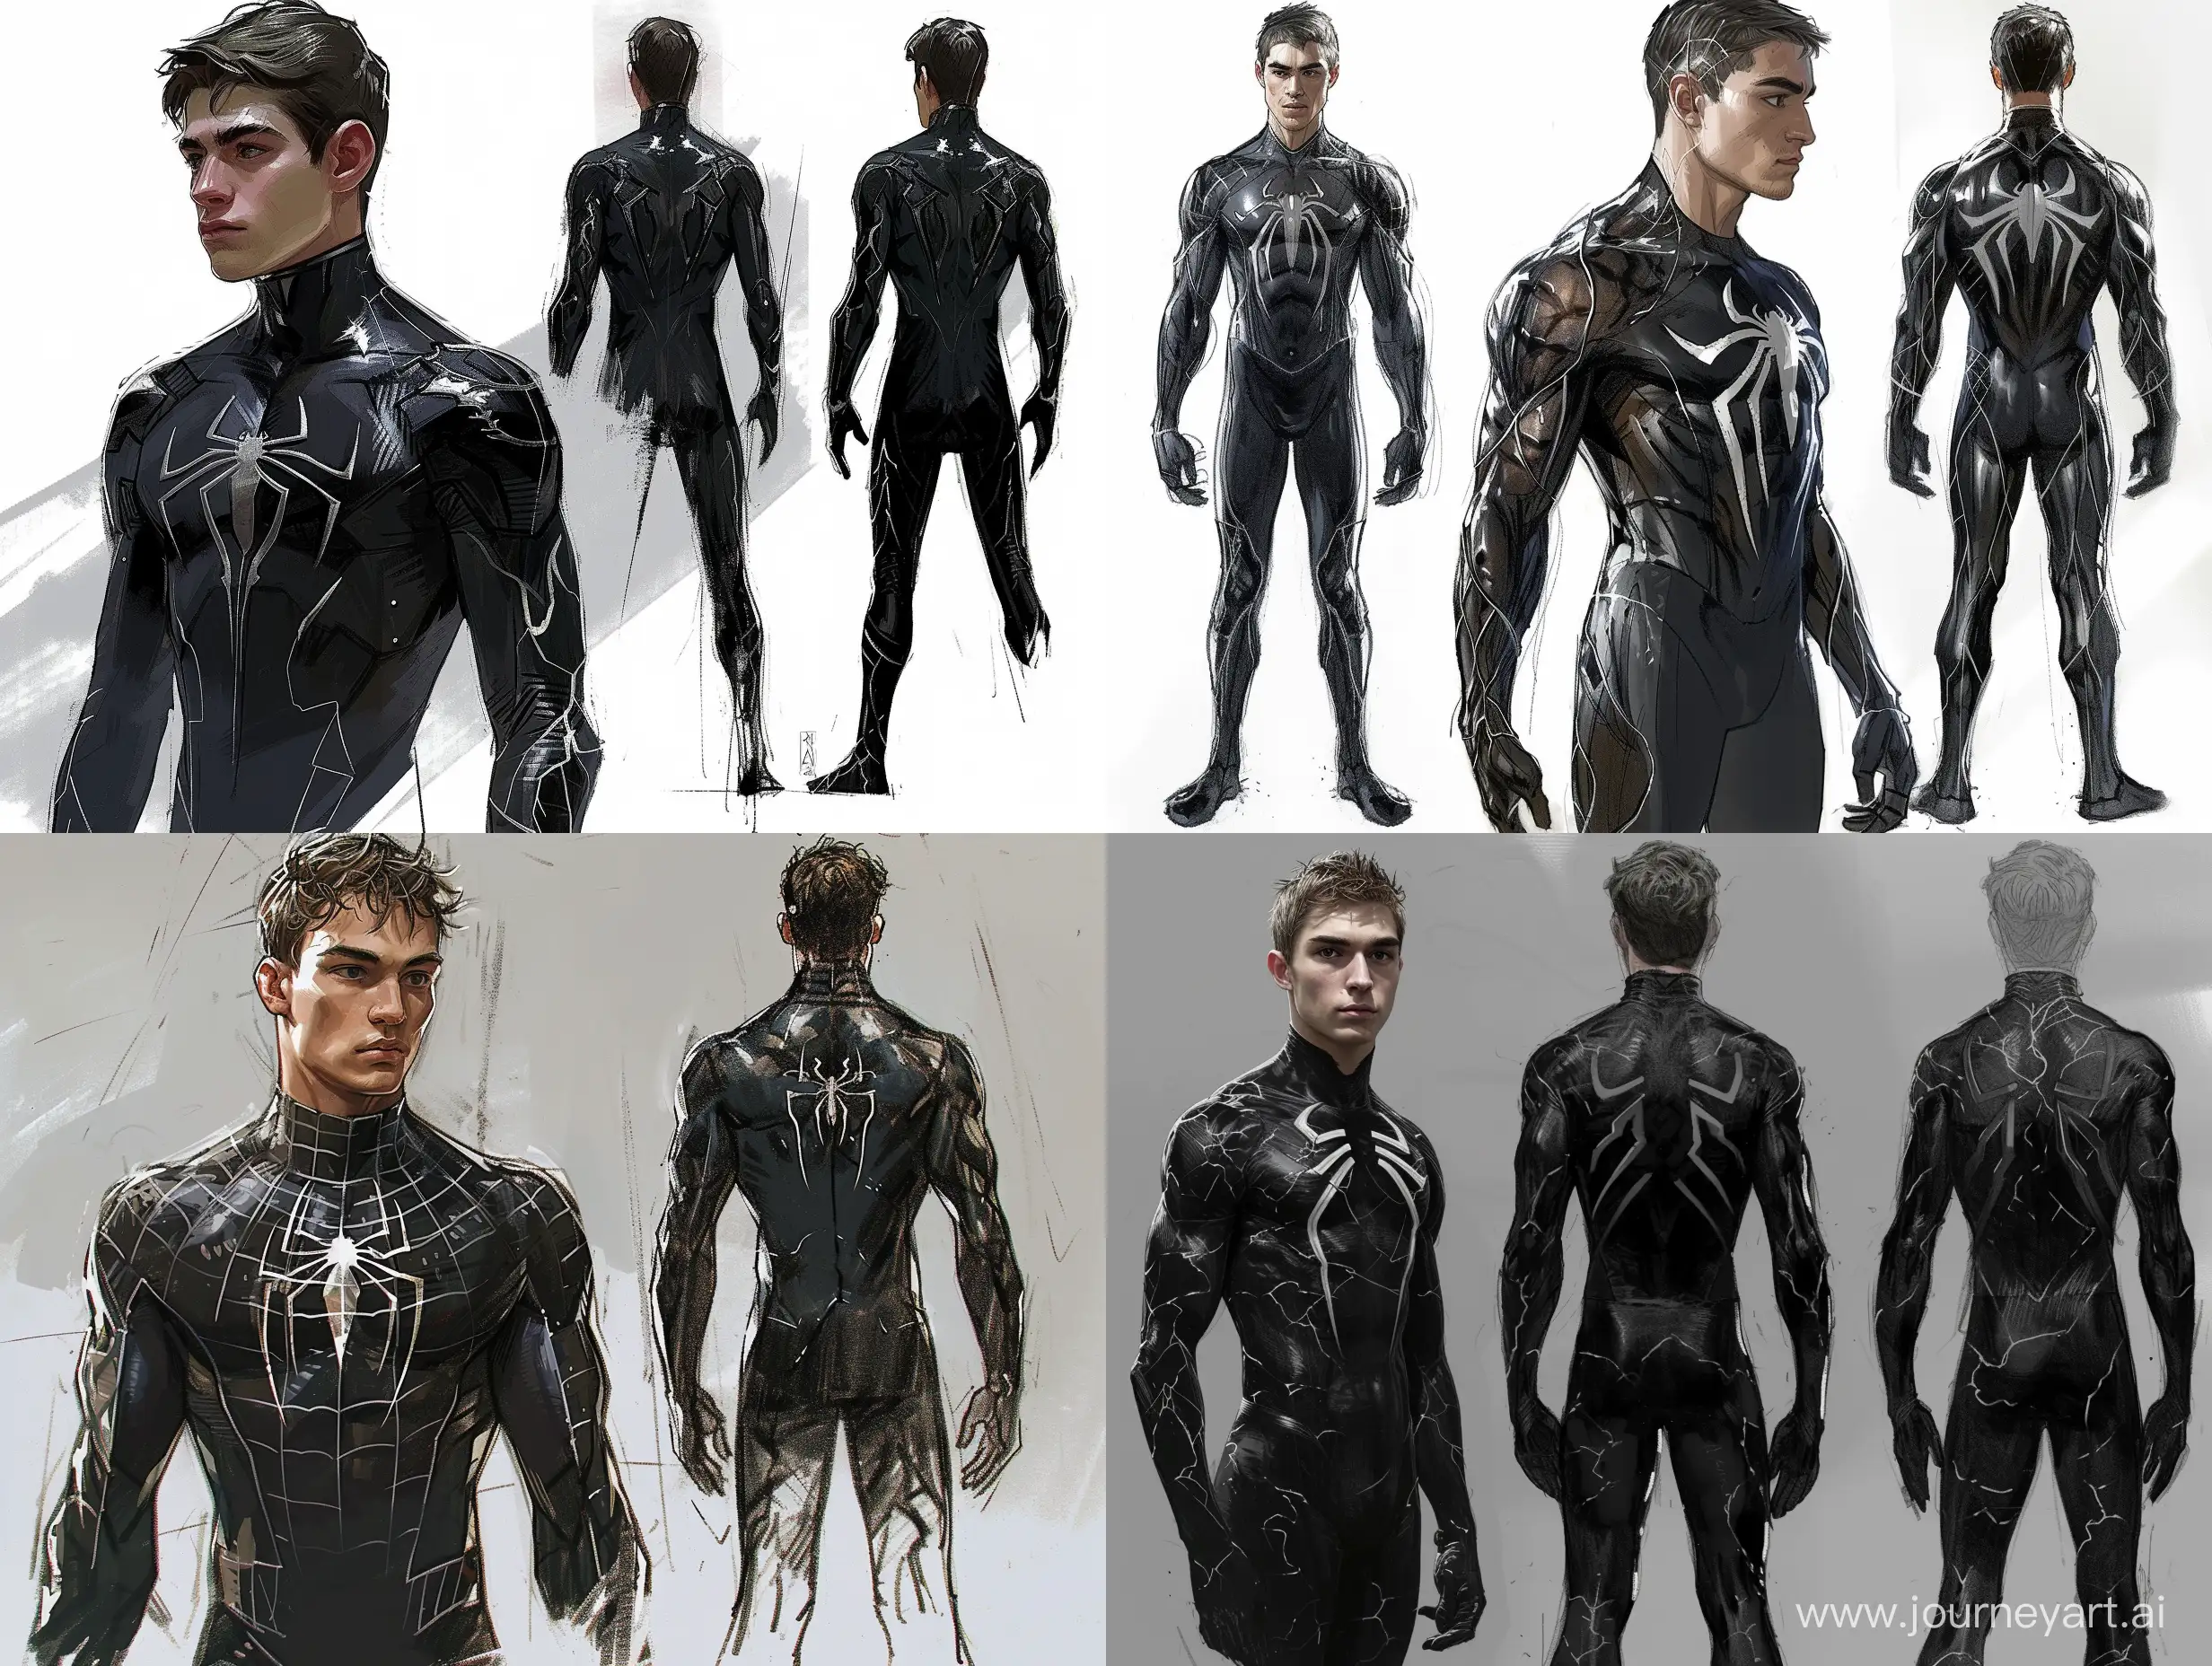 Brenton Thwaites Front back side view concept drawing work Spider Man 3 black symbiote costume Concept Drawing Brenton Thwaites face, Brenton Thwaites